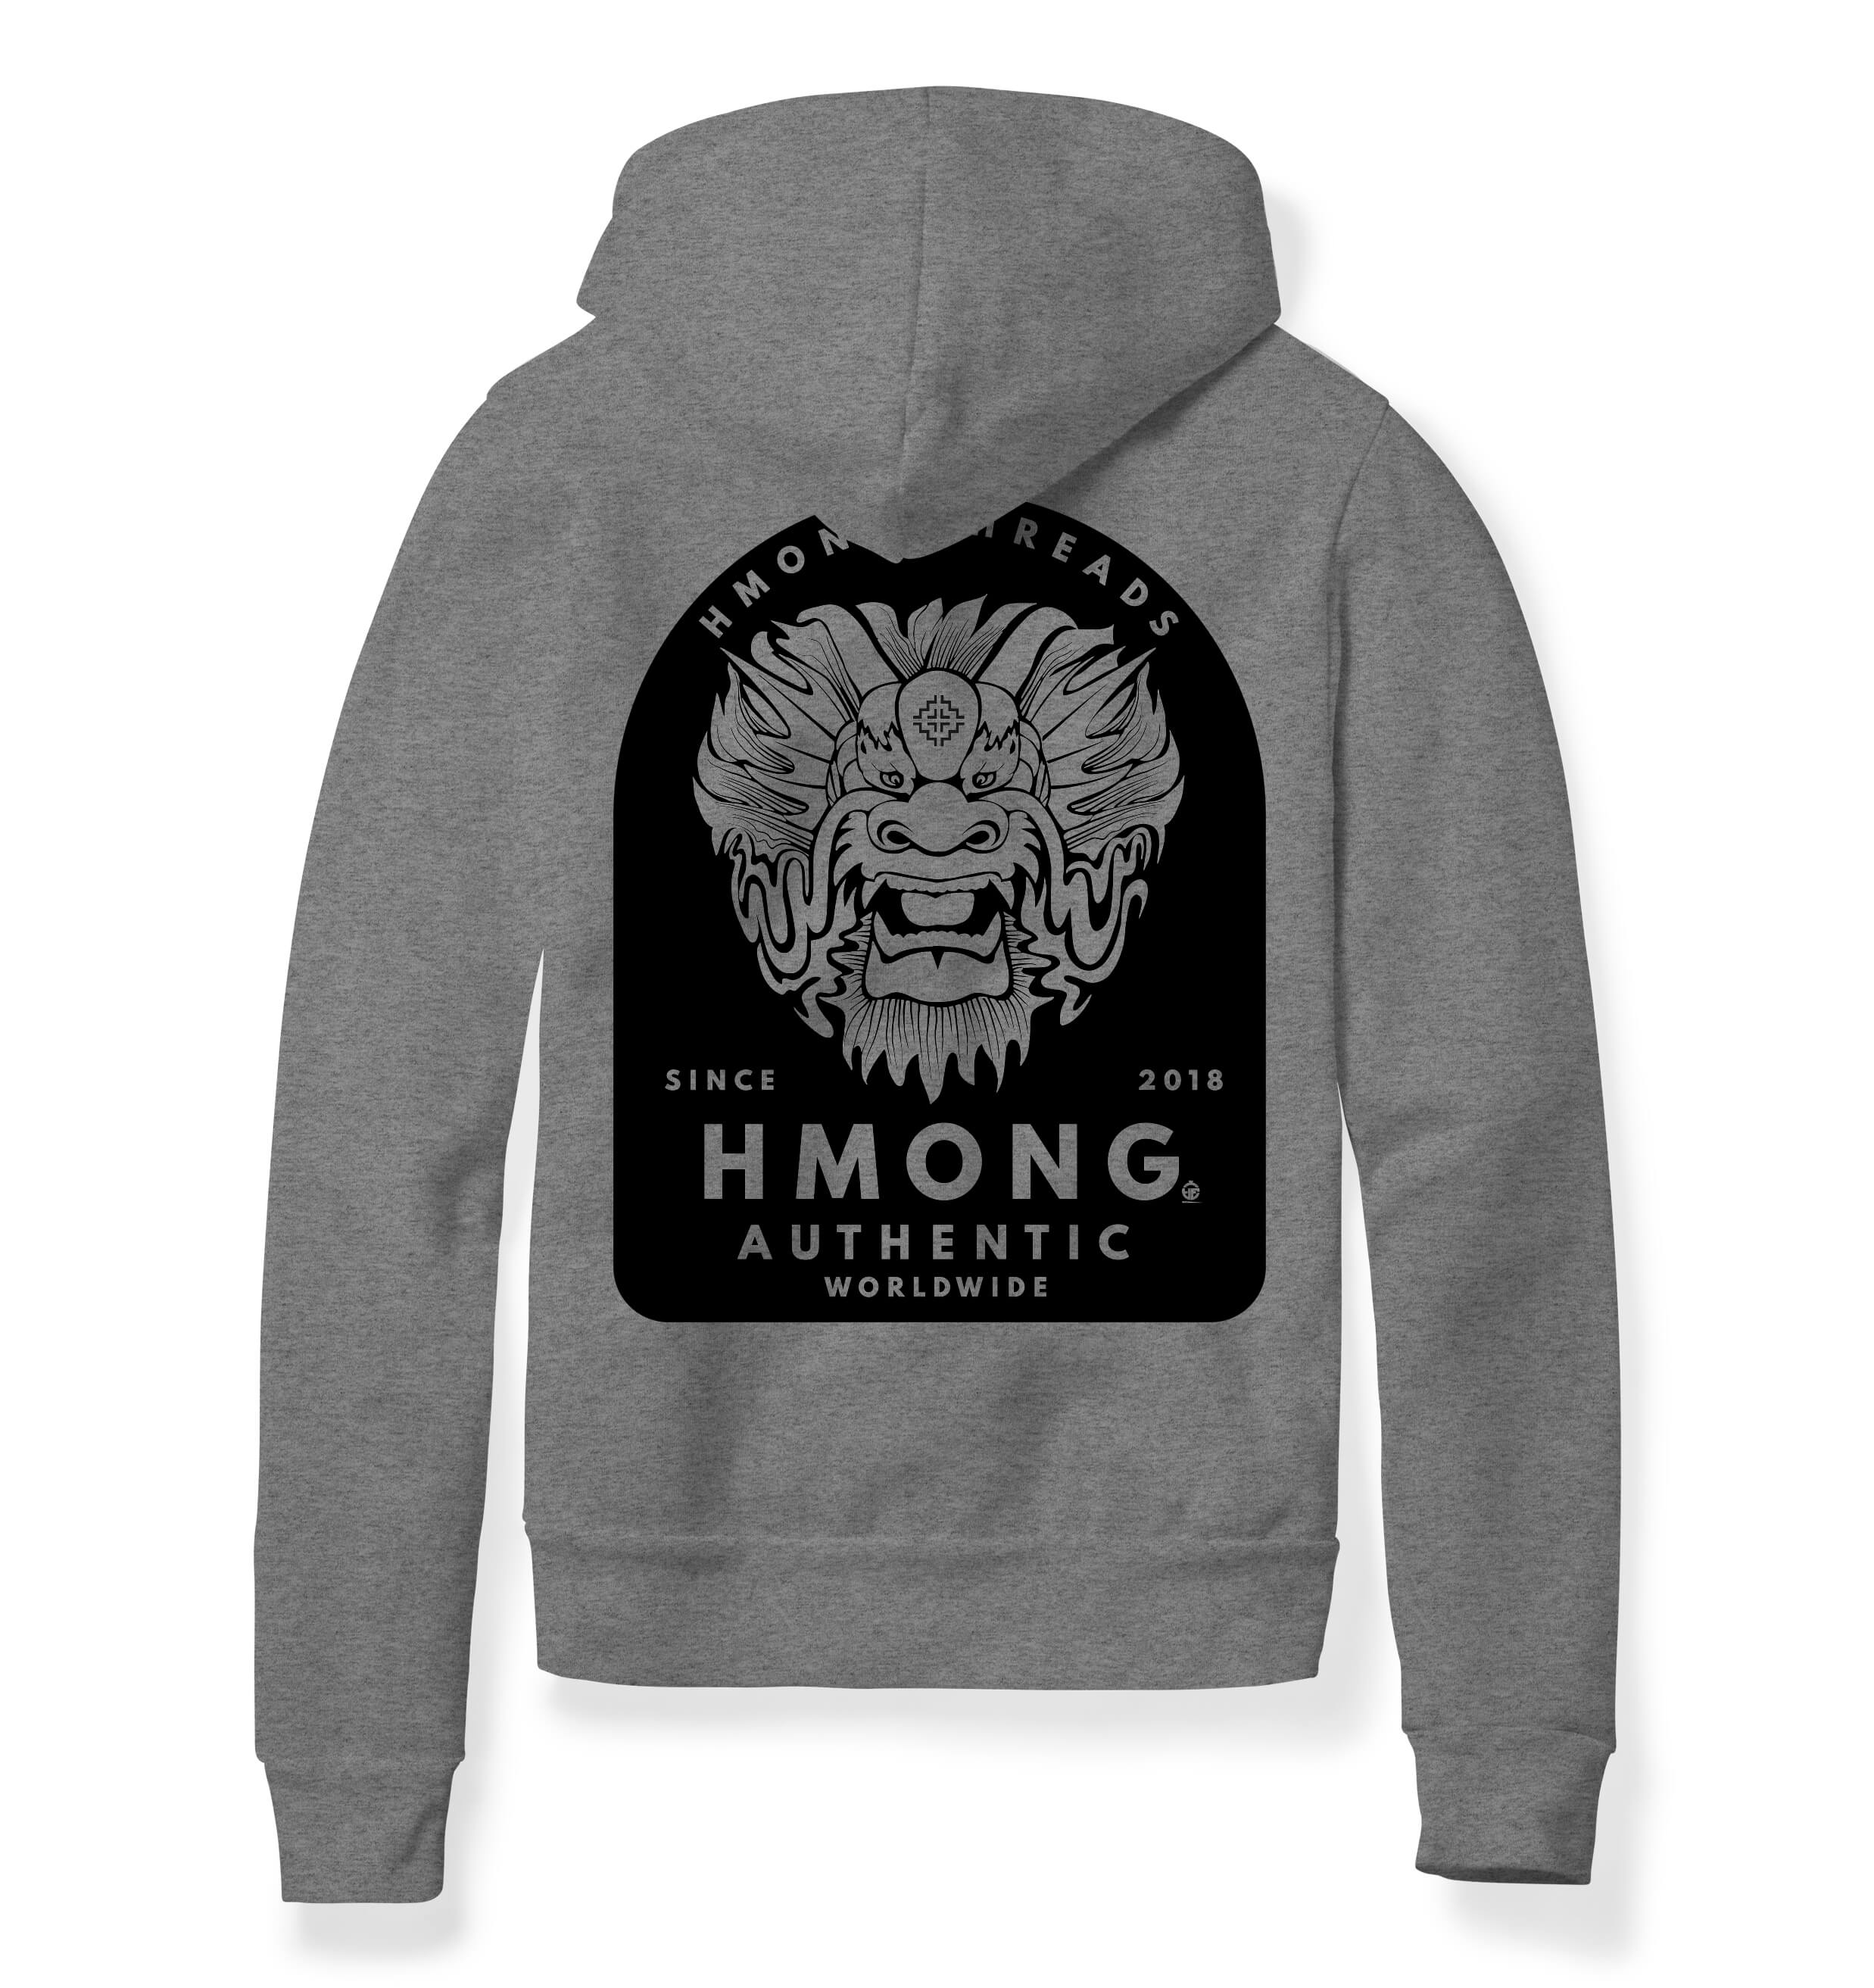 HMONG THREADS DRAGON AUTHENTIC HEATHER GREY UNISEX HOODIE